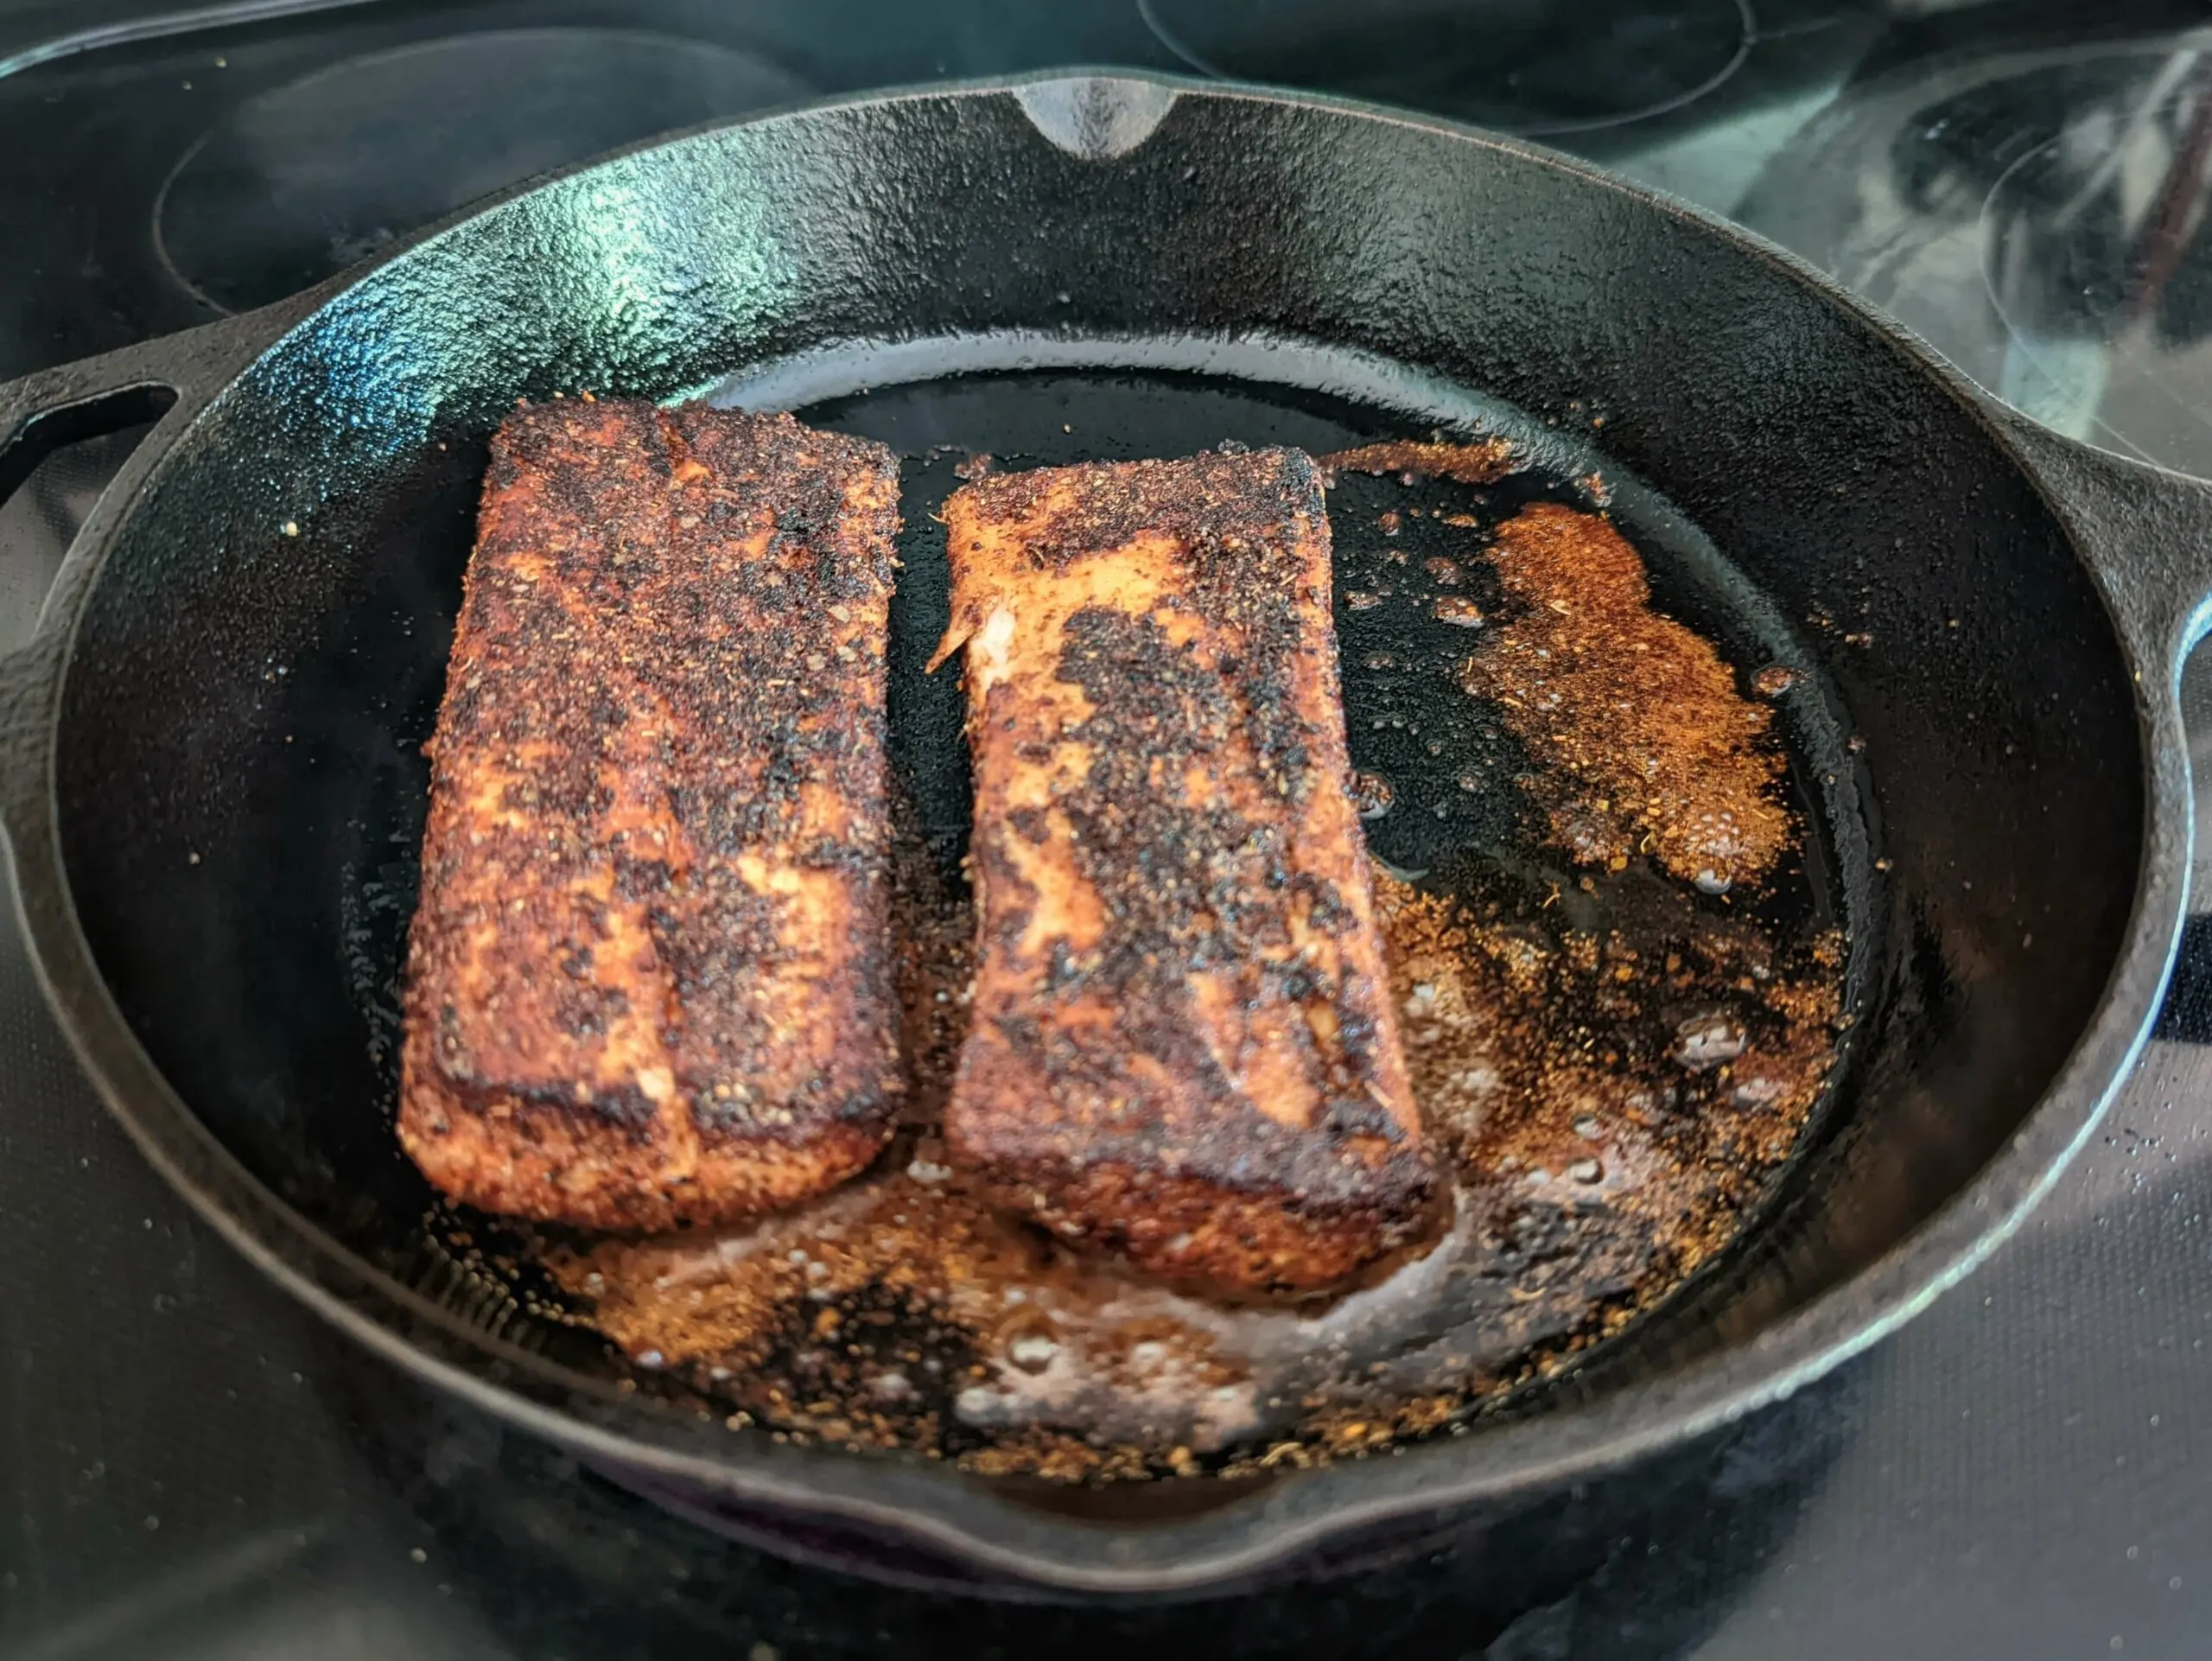 Flip the fillet and cook the other side for 3-4 minutes.